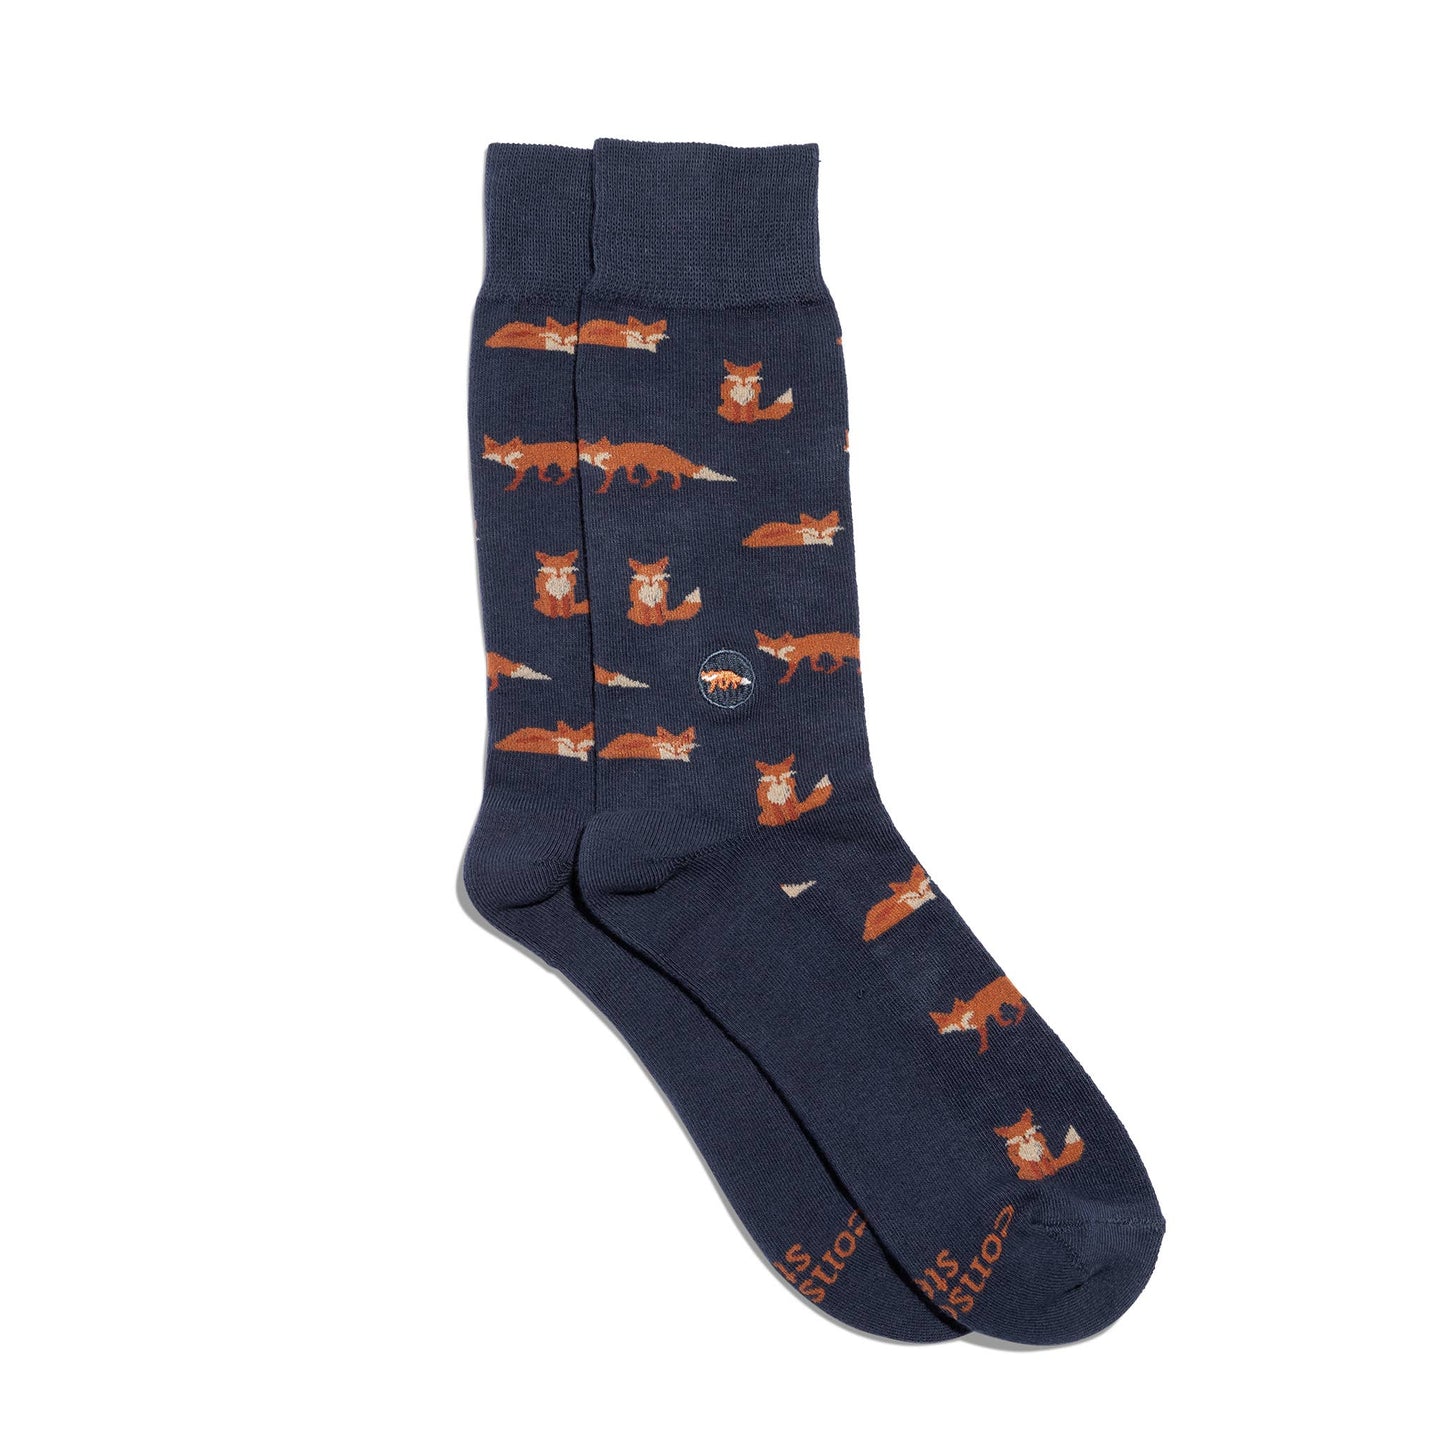 Conscious Step - Socks that Protect Foxes  Conscious Step   -better made easy-eco-friendly-sustainable-gifting